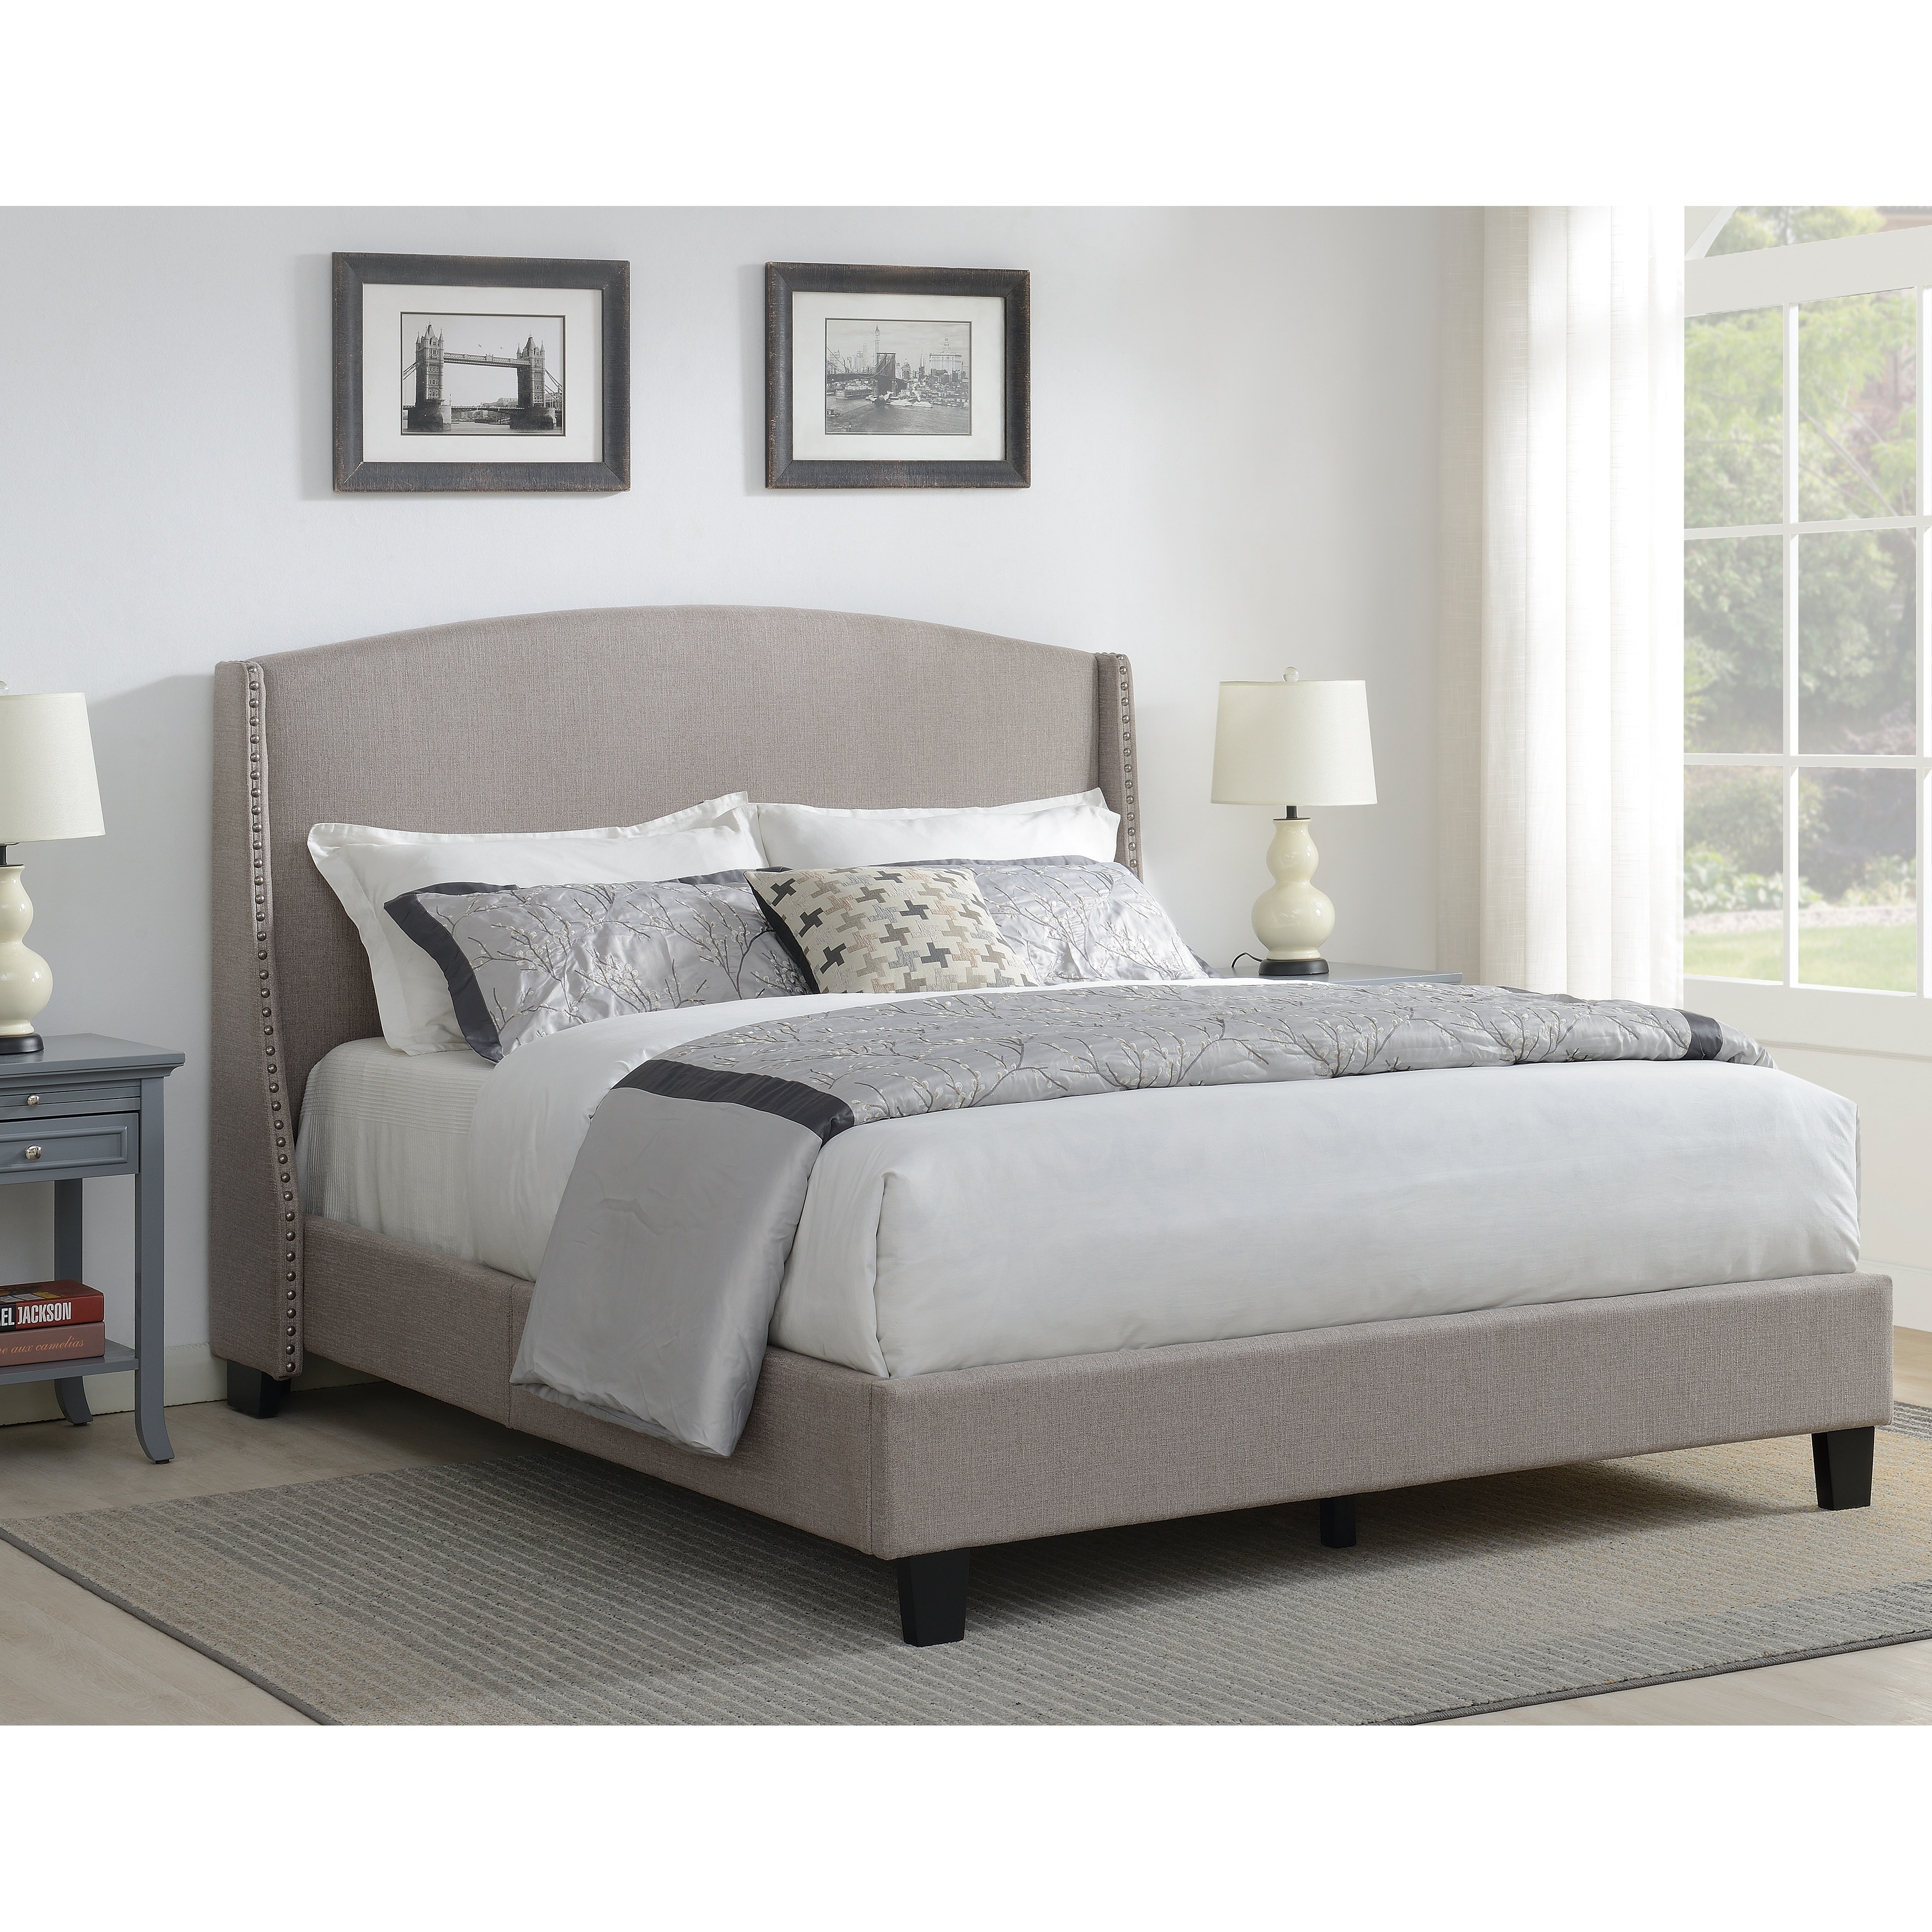 ACH Bedroom Shelter Style Upholstered Wingback Queen Bed in Storm